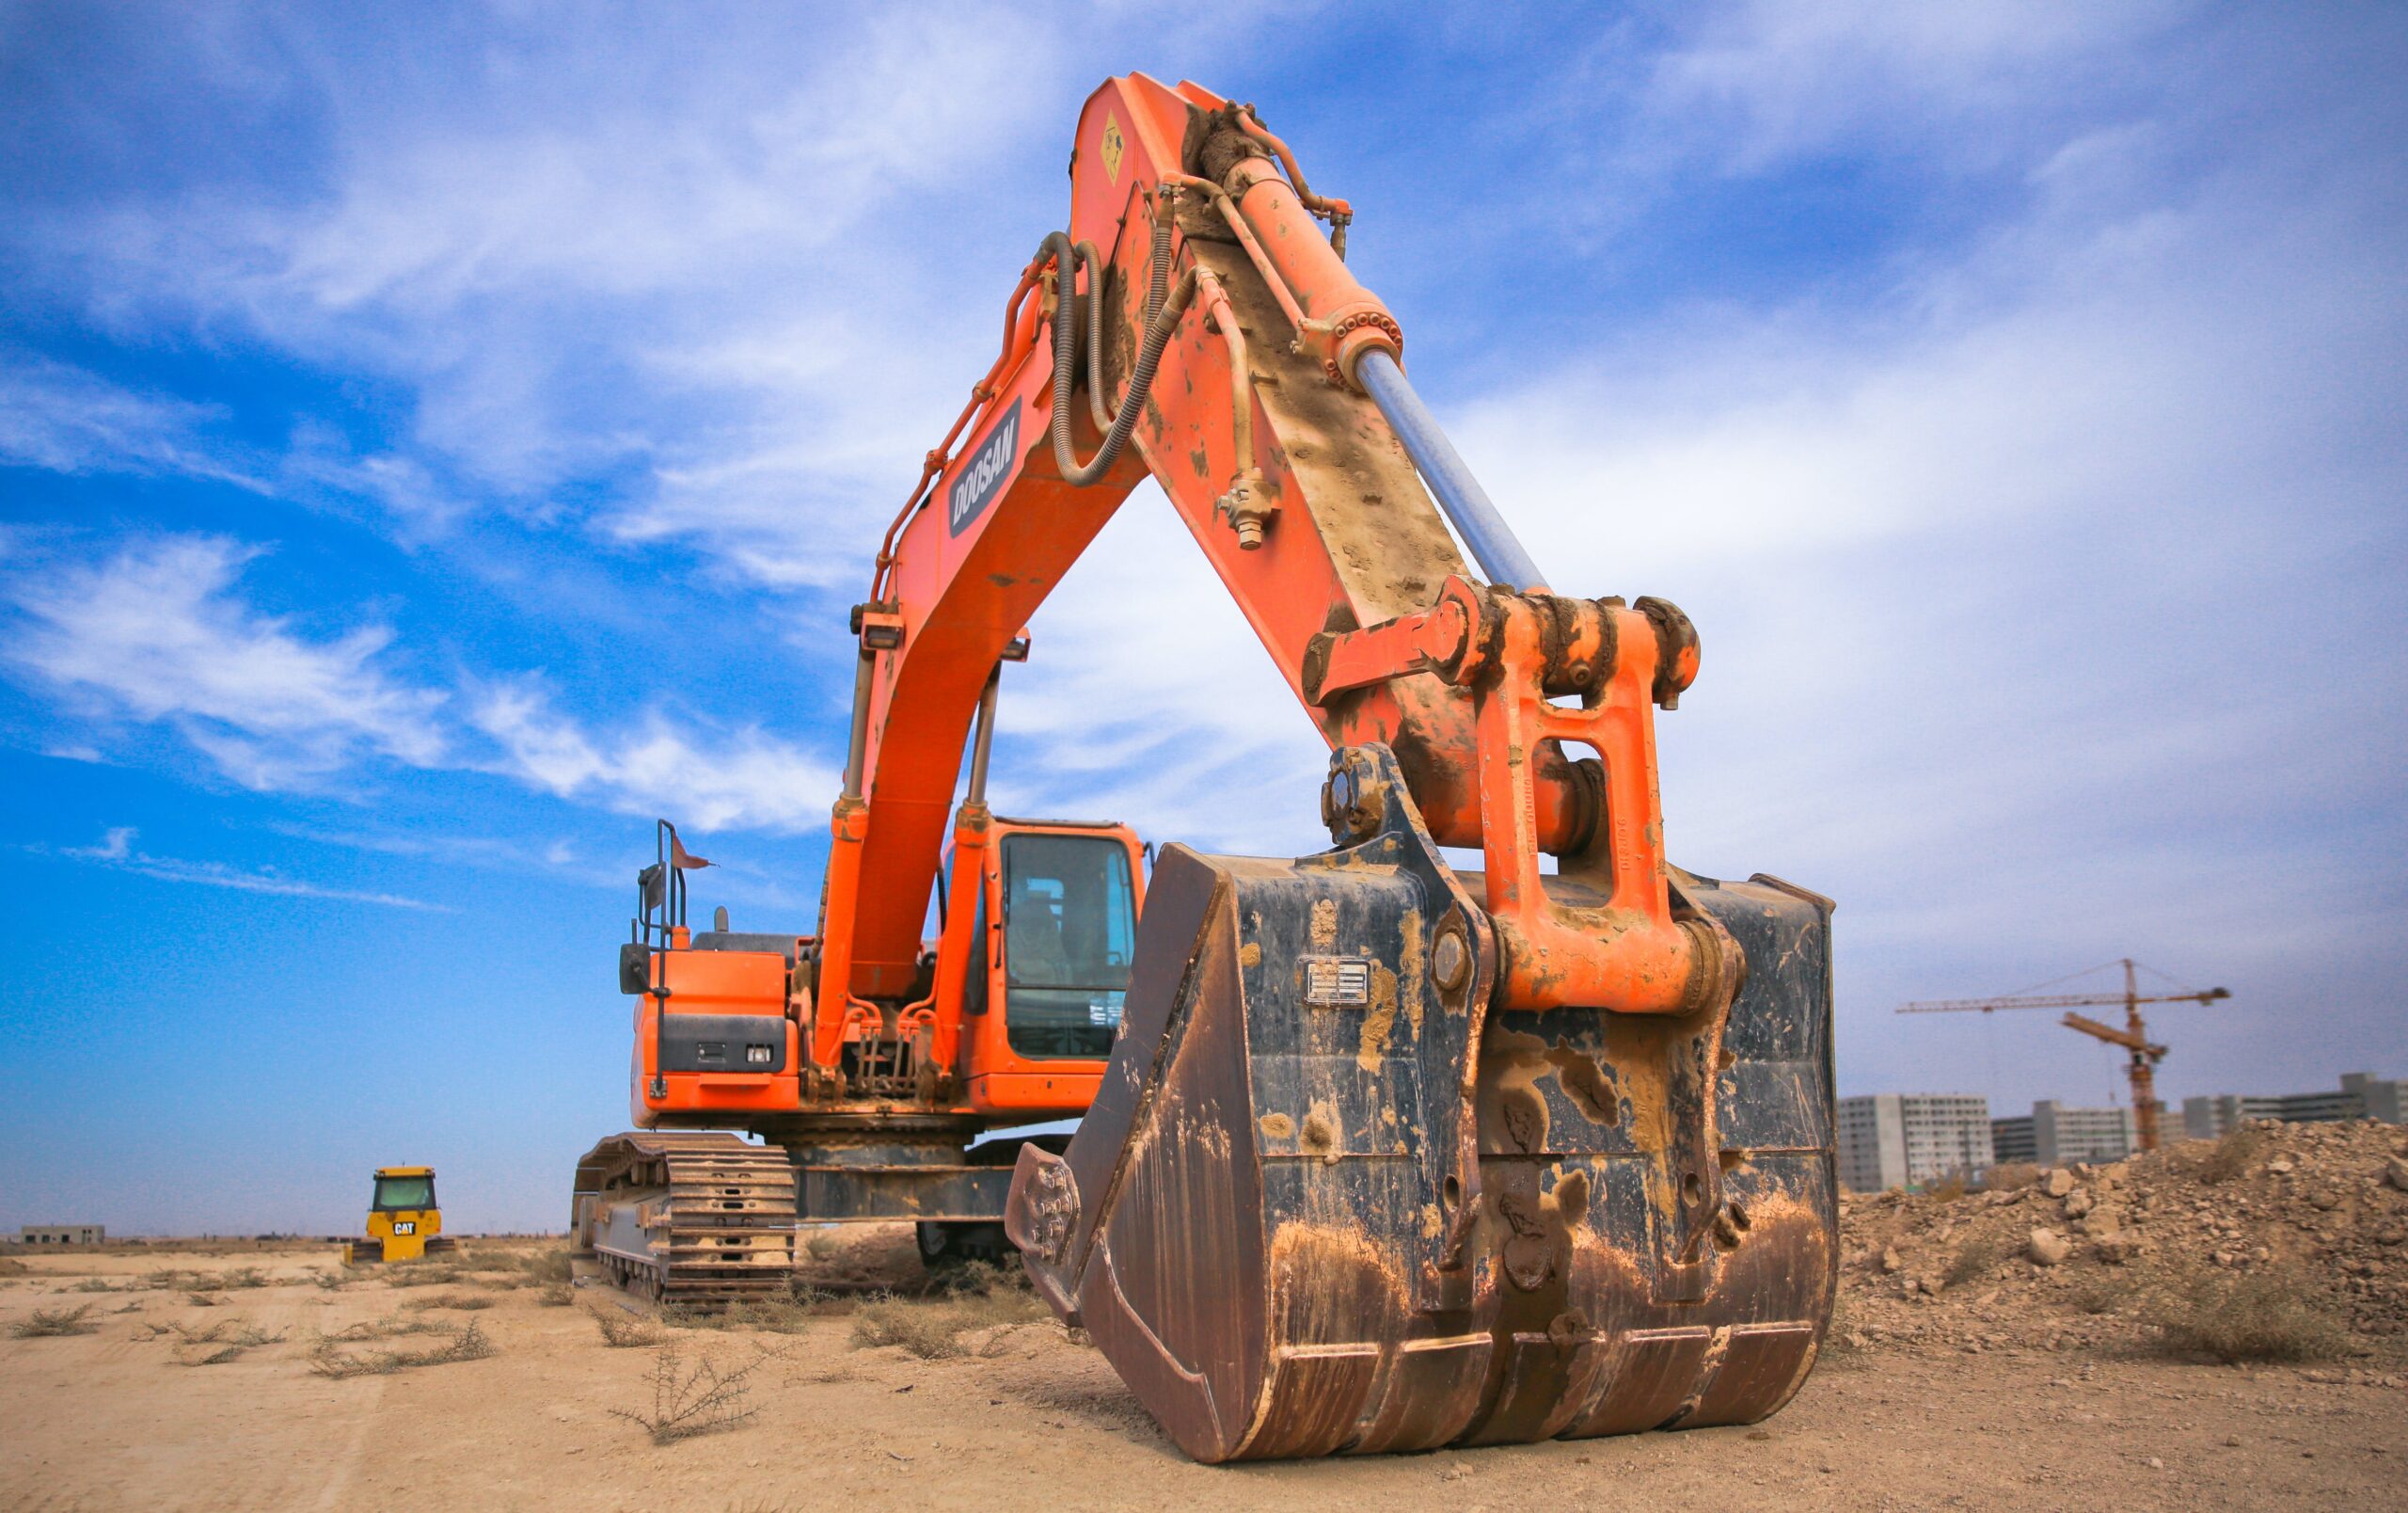 Asset used to exemplify what can be leveraged through Equipment Leasing